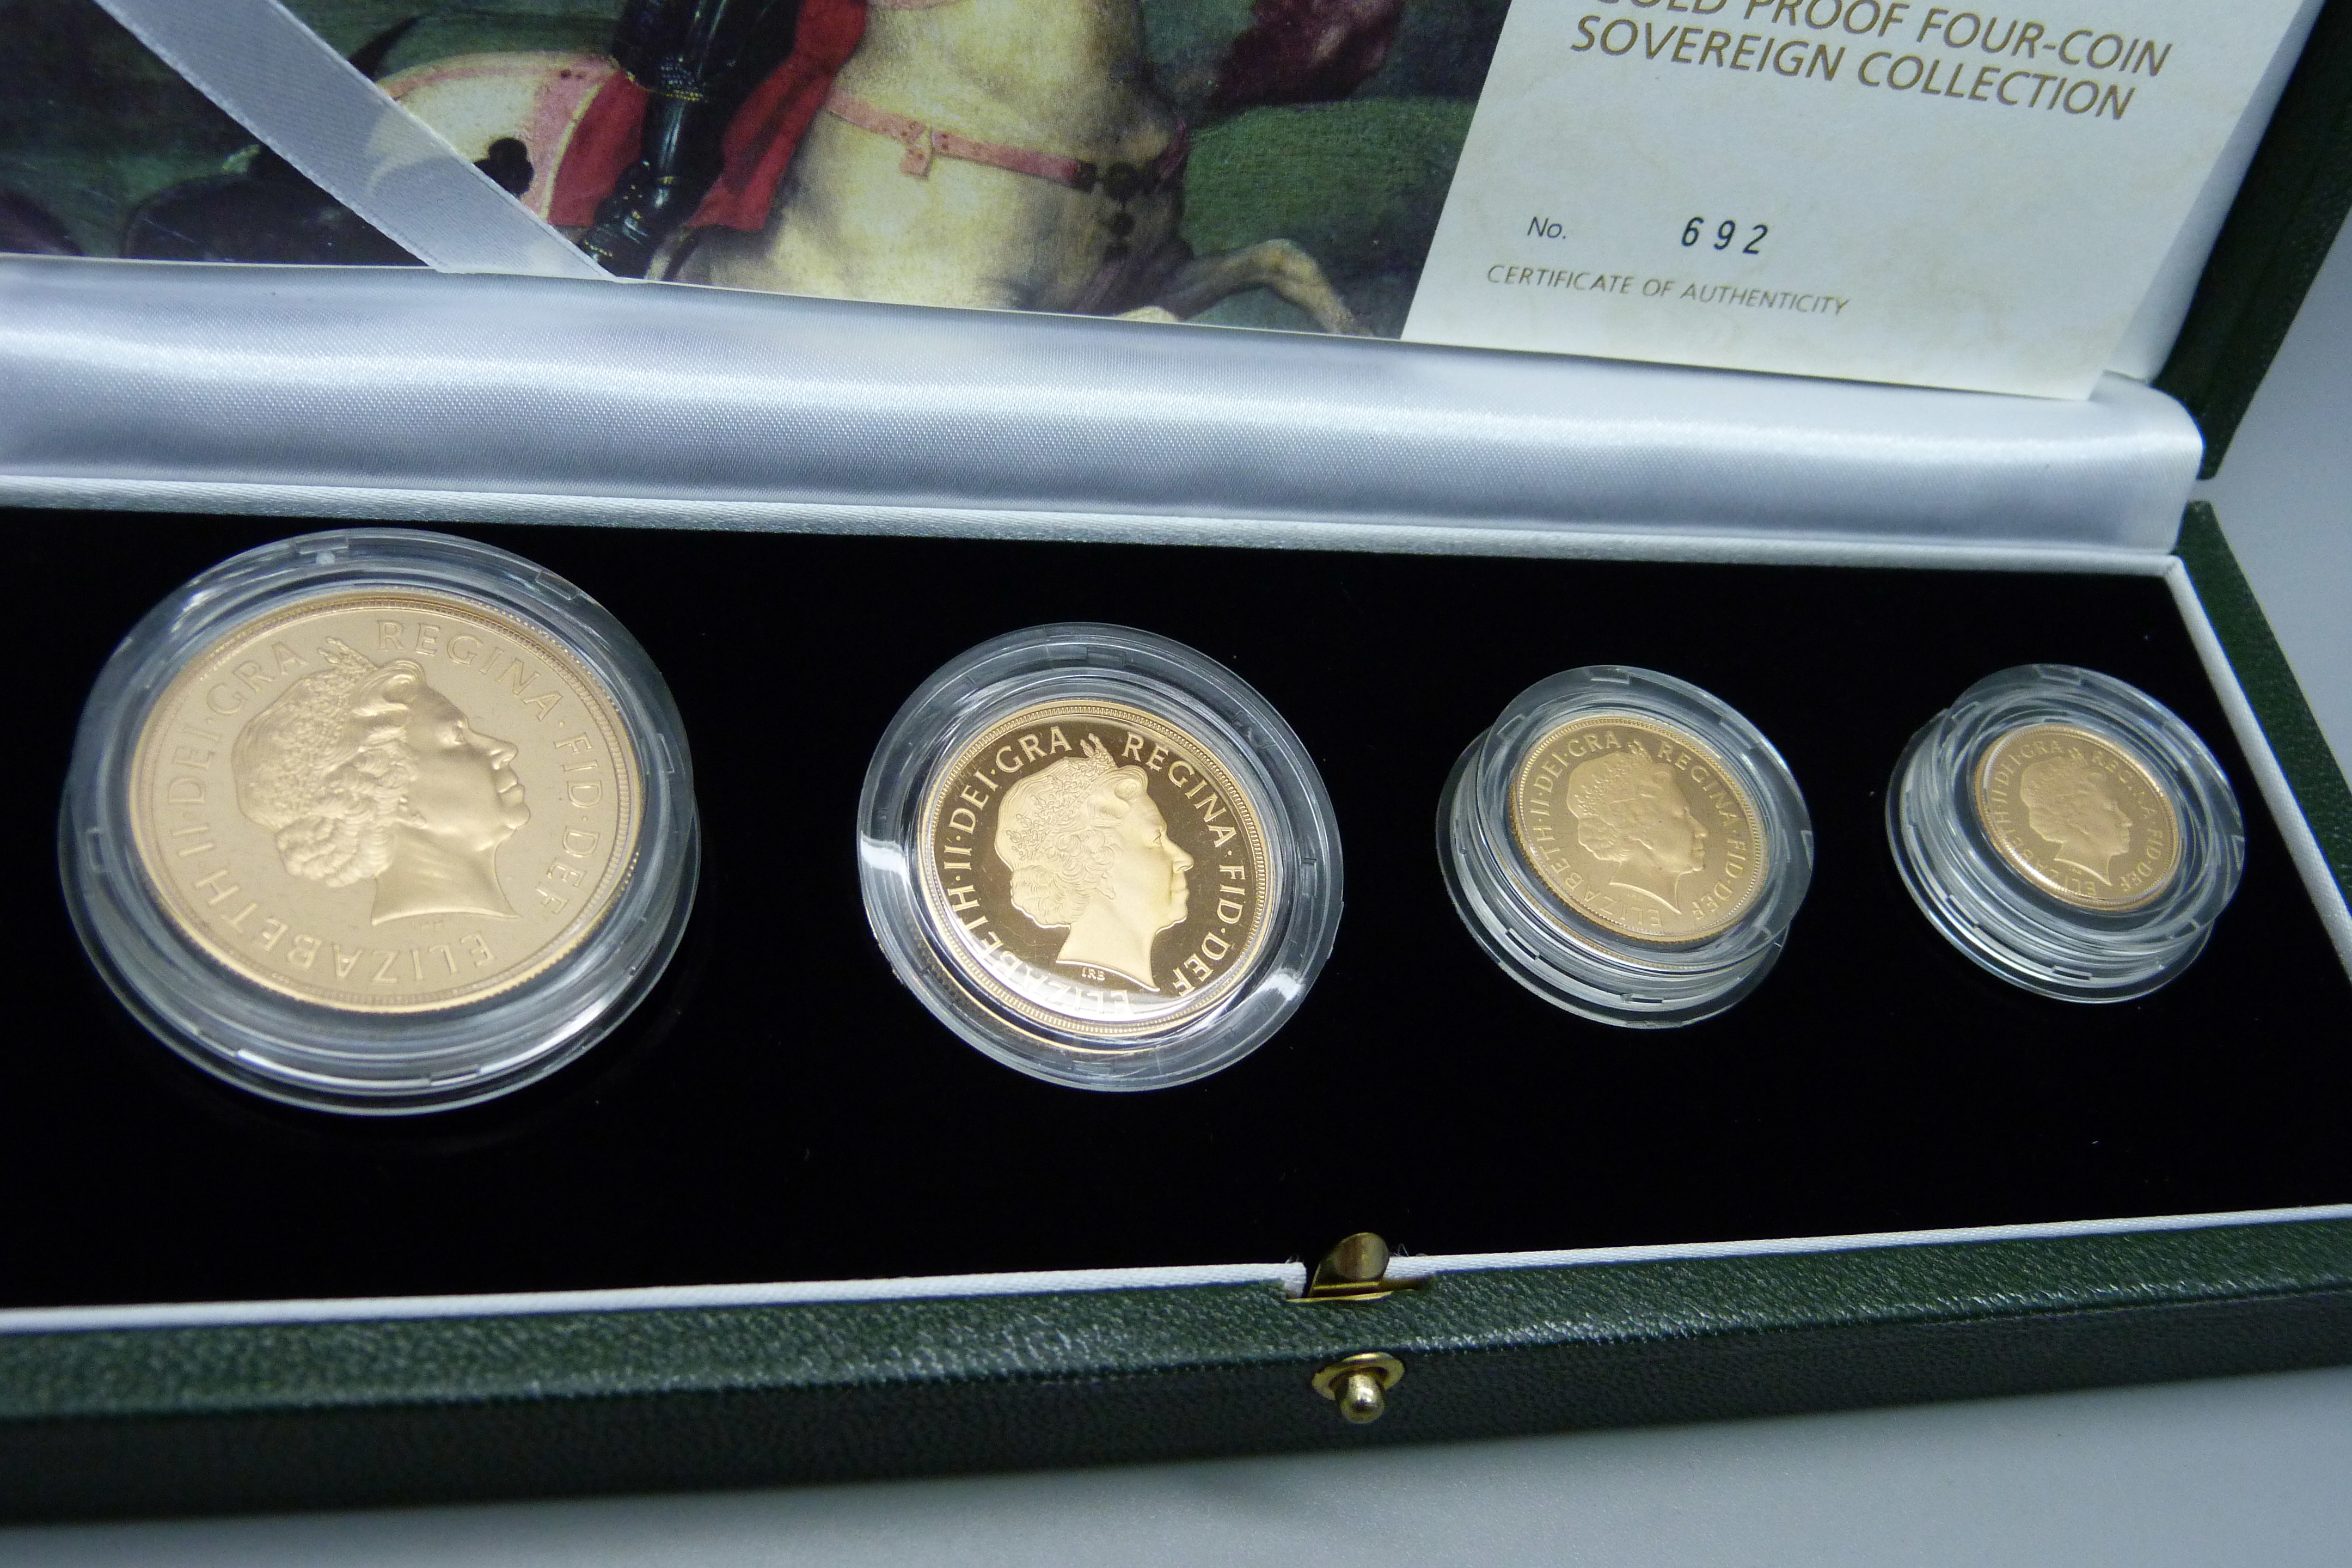 The Royal Mint 2007 UK gold proof four-coin sovereign collection, no. 692 - Image 3 of 4